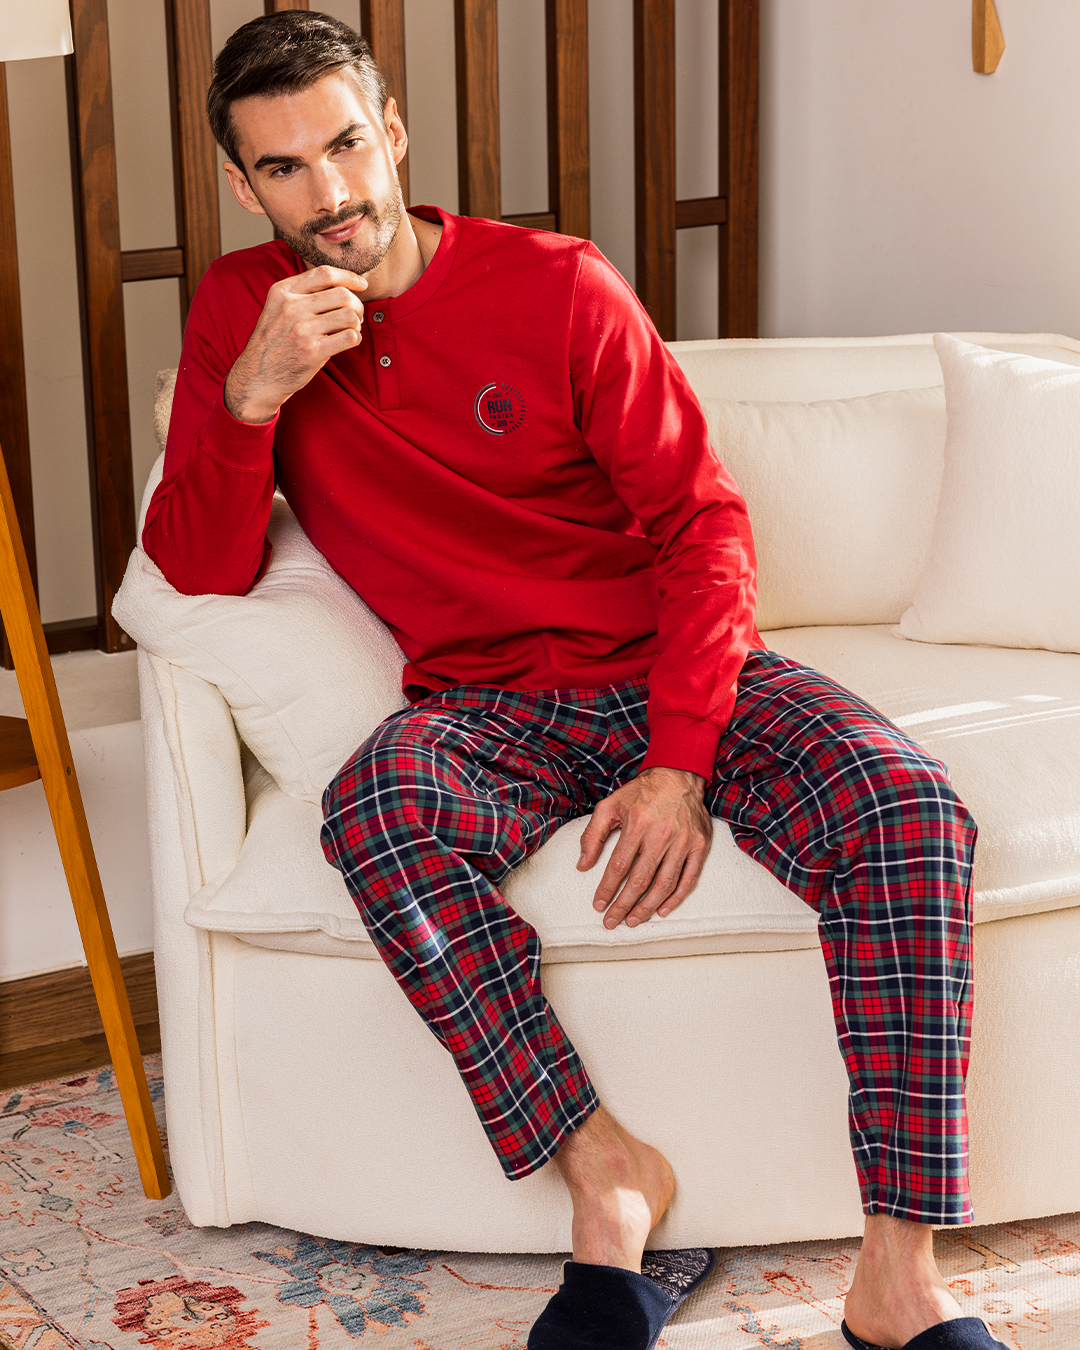 Men's pajamas, plain caro fabric, plain sweatshirt, long sleeve, cape, with a round neck and buttoned collar, with a print on the chest.